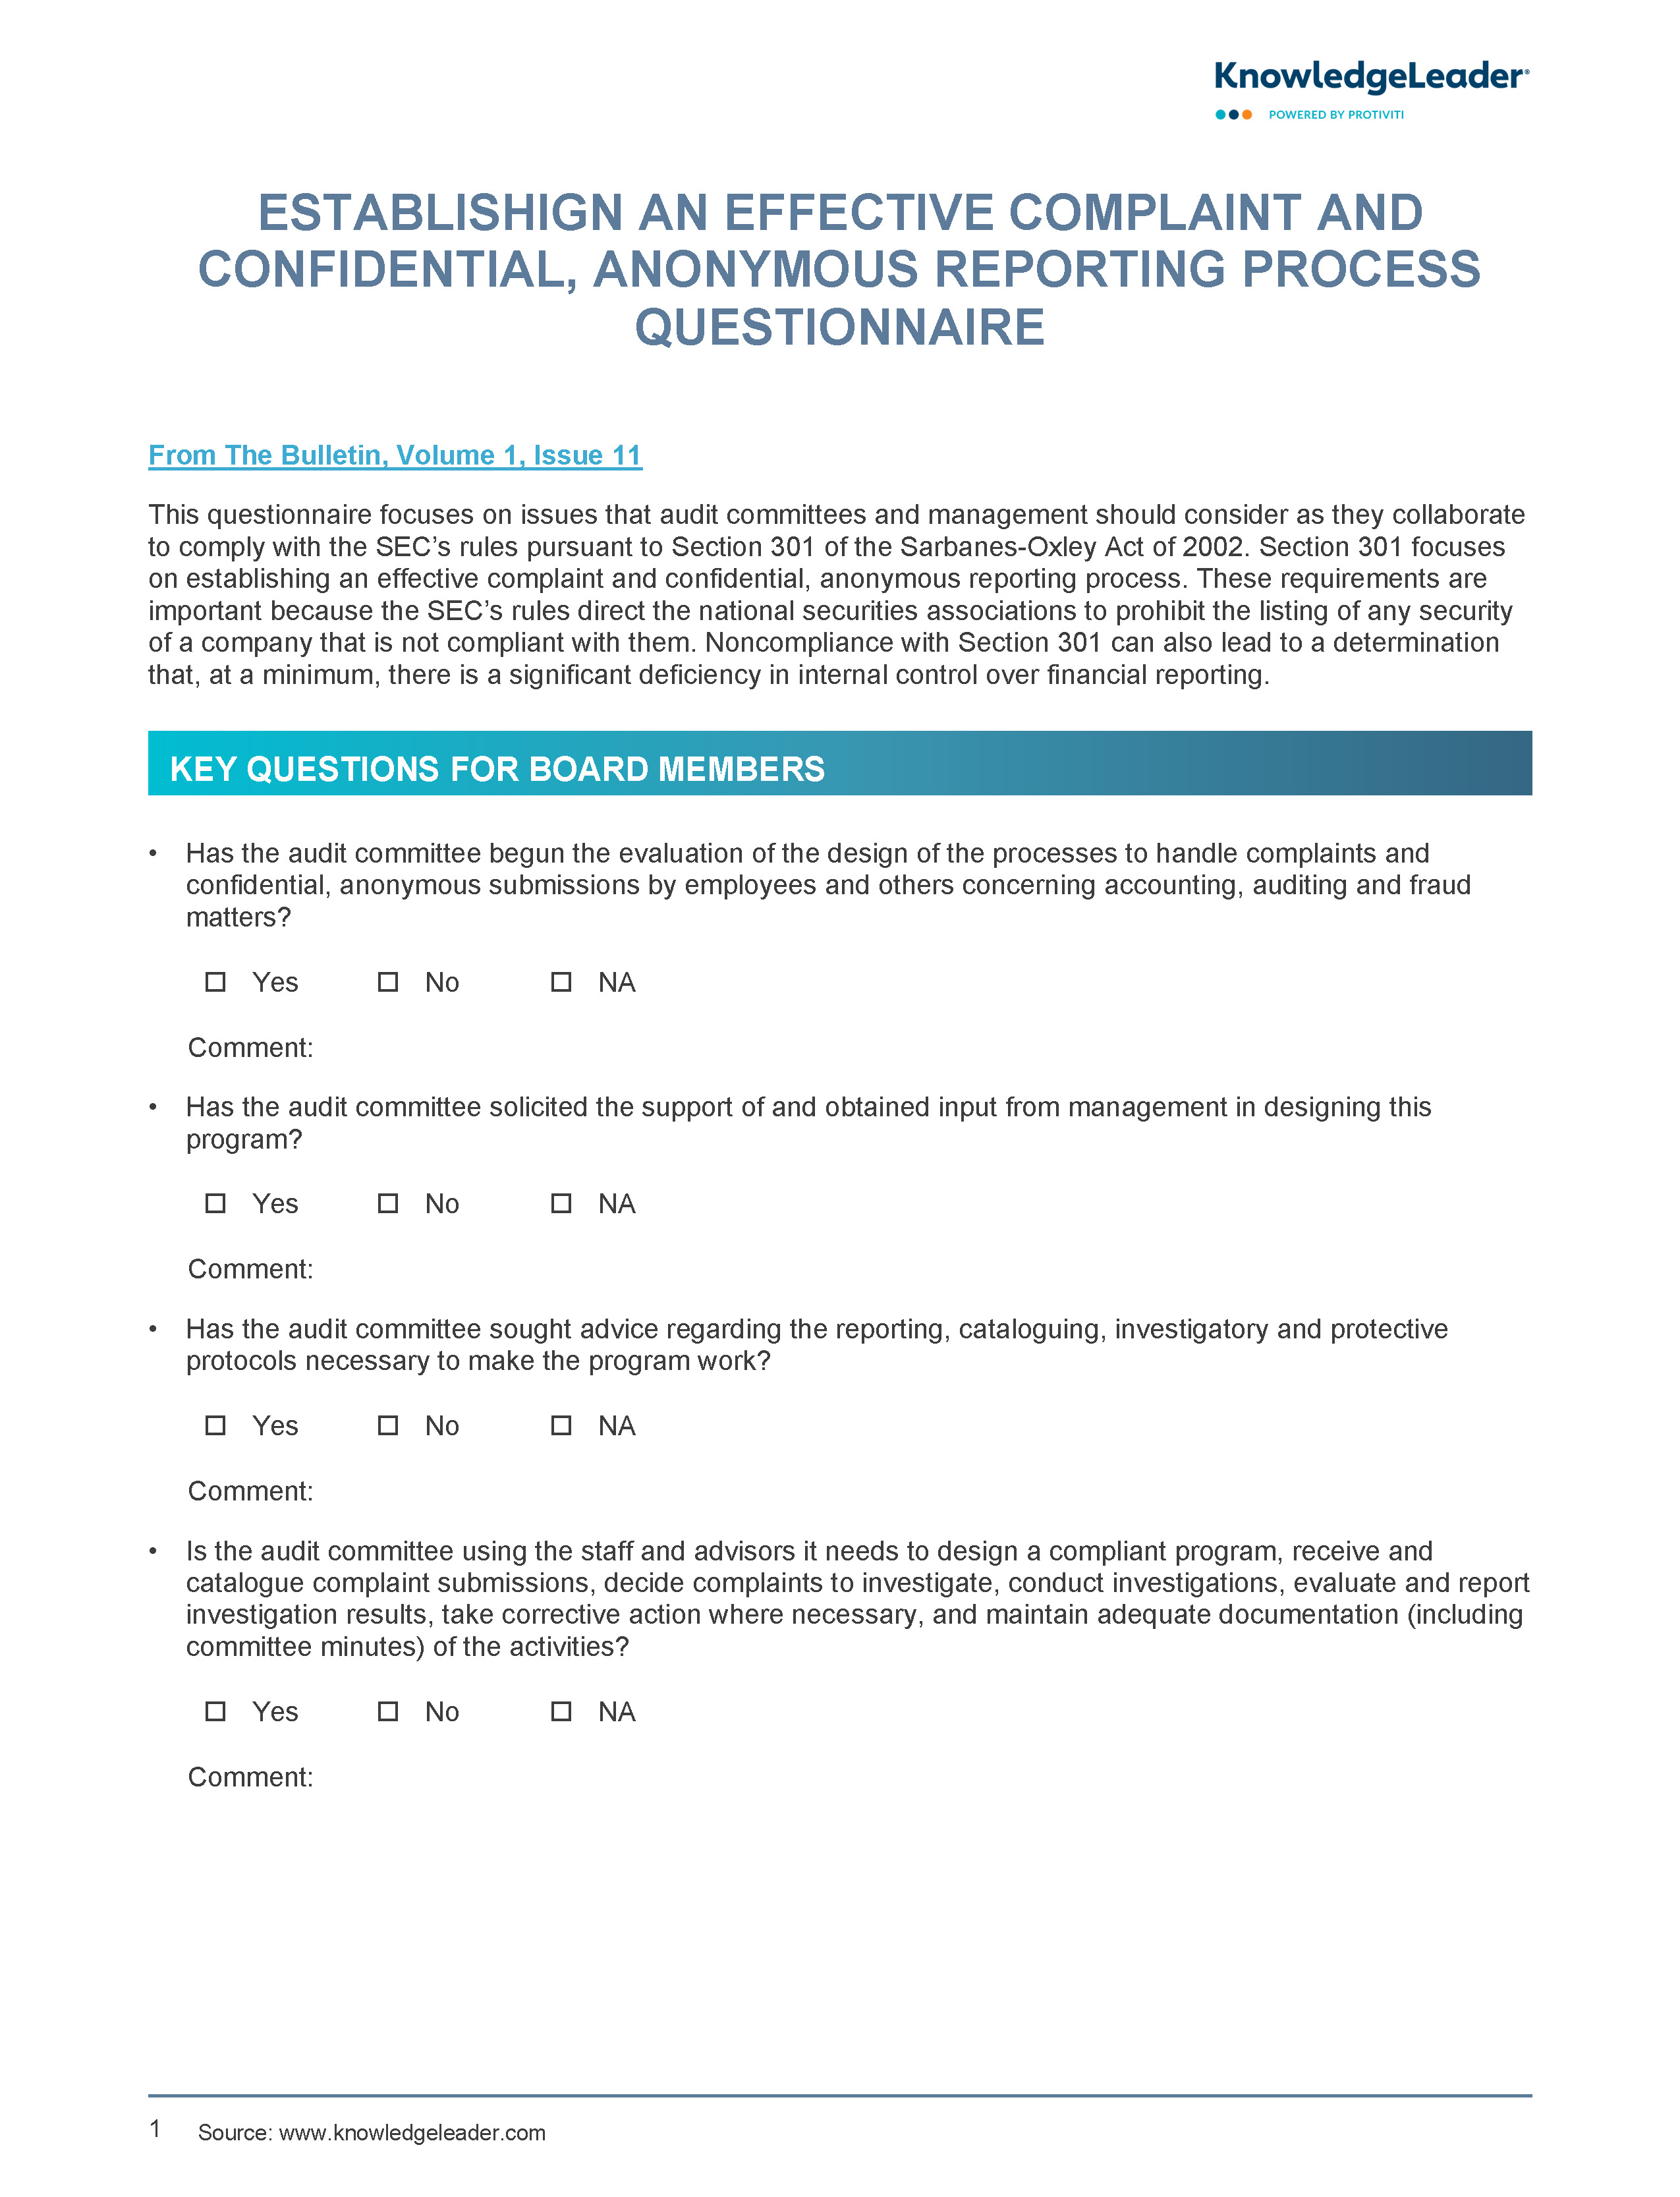 Screenshot of the first page of Establishing an Effective Complaint Reporting Process Questionnaire